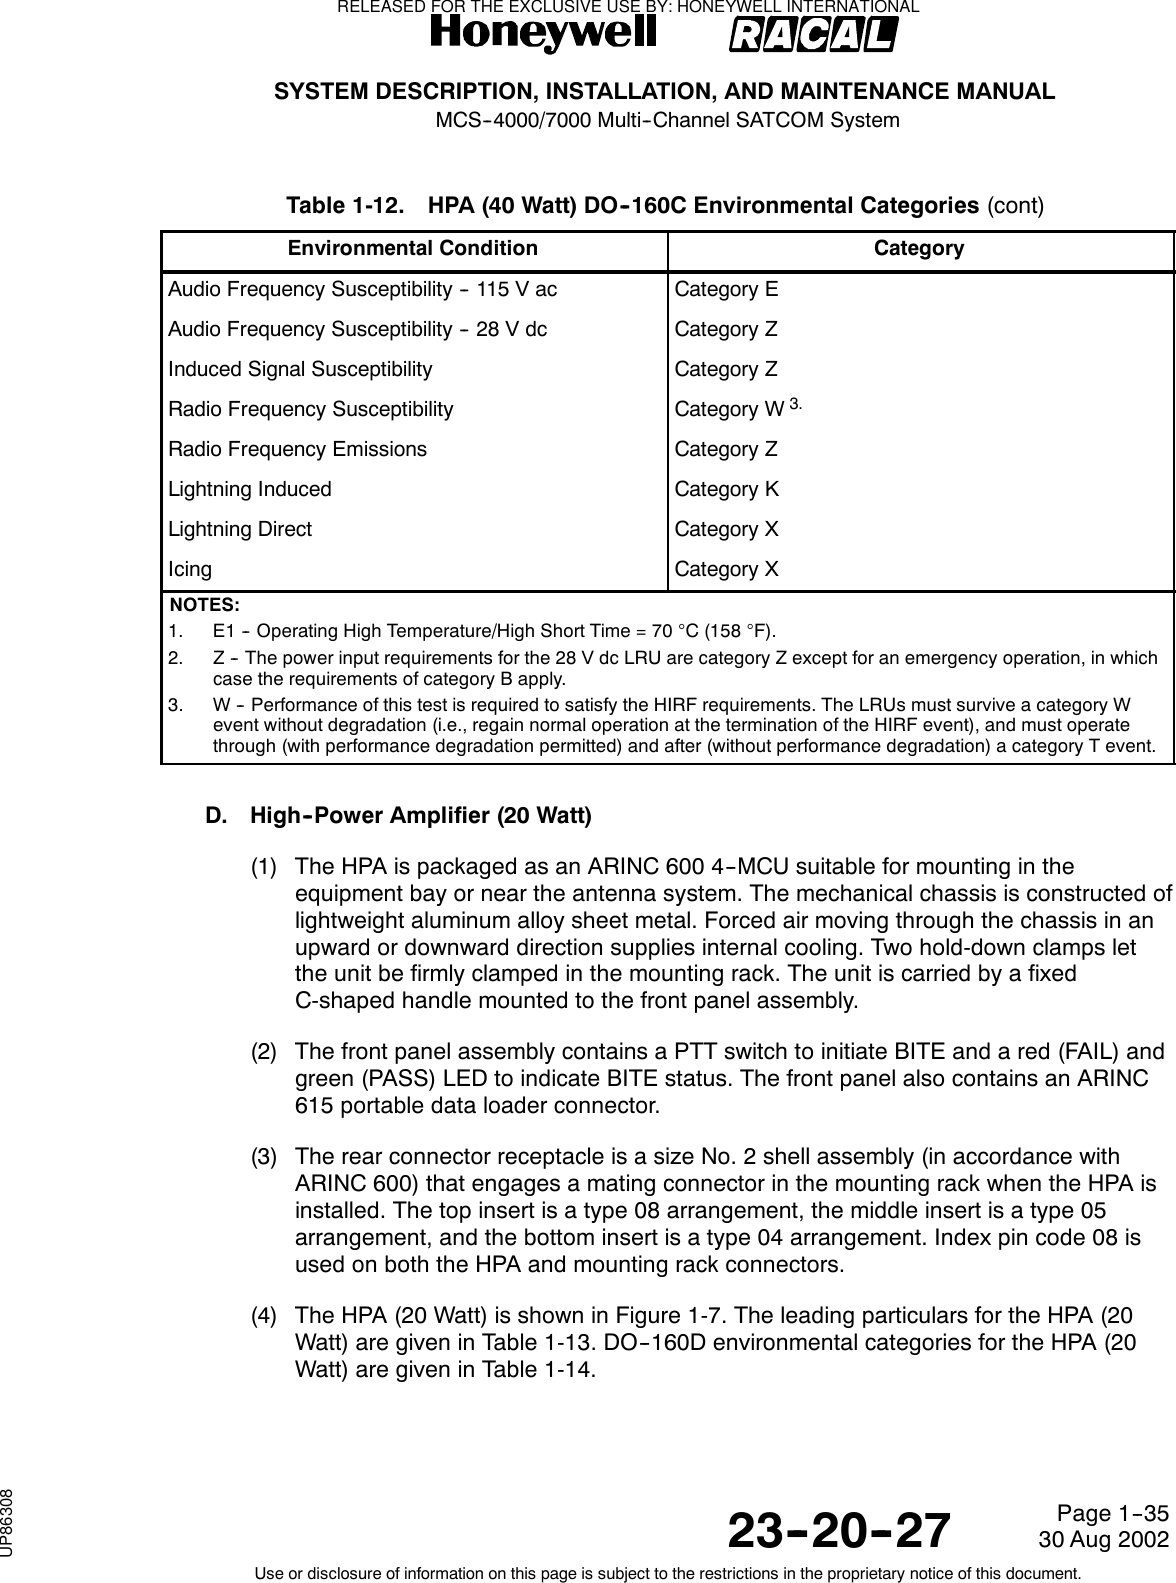 SYSTEM DESCRIPTION, INSTALLATION, AND MAINTENANCE MANUALMCS--4000/7000 Multi--Channel SATCOM System23--20--2730 Aug 2002Use or disclosure of information on this page is subject to the restrictions in the proprietary notice of this document.Page 1--35Table 1-12. HPA (40 Watt) DO--160C Environmental Categories (cont)Environmental Condition CategoryAudio Frequency Susceptibility -- 115 V ac Category EAudio Frequency Susceptibility -- 28 V dc Category ZInduced Signal Susceptibility Category ZRadio Frequency Susceptibility Category W3.Radio Frequency Emissions Category ZLightning Induced Category KLightning Direct Category XIcing Category XNOTES:1. E1 -- Operating High Temperature/High Short Time = 70 °C (158 °F).2. Z -- The power input requirements for the 28 V dc LRU are category Z except for an emergency operation, in whichcase the requirements of category B apply.3. W -- Performance of this test is required to satisfy the HIRF requirements. The LRUs must survive a category Wevent without degradation (i.e., regain normal operation at the termination of the HIRF event), and must operatethrough (with performance degradation permitted) and after (without performance degradation) a category T event.D. High--Power Amplifier (20 Watt)(1) The HPA is packaged as an ARINC 600 4--MCU suitable for mounting in theequipment bay or near the antenna system. The mechanical chassis is constructed oflightweight aluminum alloy sheet metal. Forced air moving through the chassis in anupward or downward direction supplies internal cooling. Two hold-down clamps letthe unit be firmly clamped in the mounting rack. The unit is carried by a fixedC-shaped handle mounted to the front panel assembly.(2) The front panel assembly contains a PTT switch to initiate BITE and a red (FAIL) andgreen (PASS) LED to indicate BITE status. The front panel also contains an ARINC615 portable data loader connector.(3) The rear connector receptacle is a size No. 2 shell assembly (in accordance withARINC 600) that engages a mating connector in the mounting rack when the HPA isinstalled. The top insert is a type 08 arrangement, the middle insert is a type 05arrangement, and the bottom insert is a type 04 arrangement. Index pin code 08 isused on both the HPA and mounting rack connectors.(4) The HPA (20 Watt) is shown in Figure 1-7. The leading particulars for the HPA (20Watt) are given in Table 1-13. DO--160D environmental categories for the HPA (20Watt) are given in Table 1-14.RELEASED FOR THE EXCLUSIVE USE BY: HONEYWELL INTERNATIONALUP86308